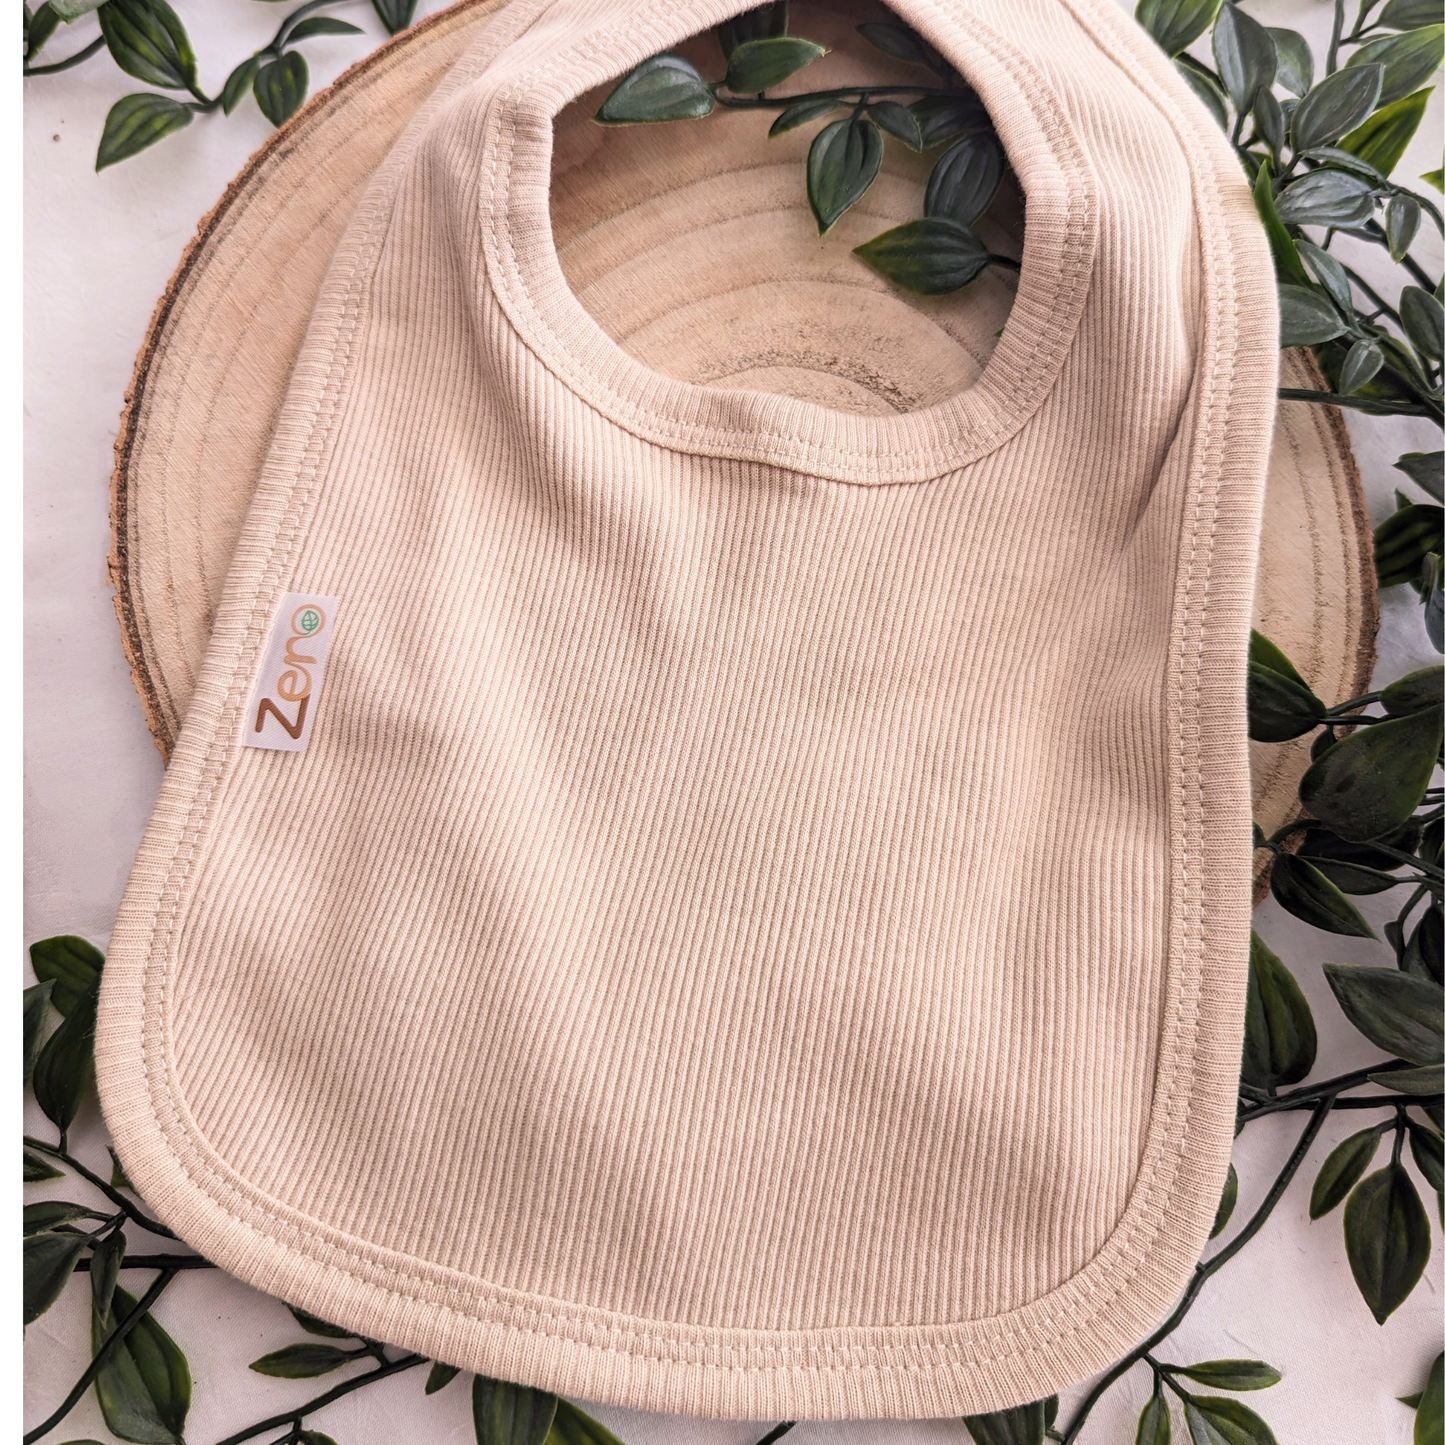 Unisex Baby Clothes - Baby bib in biscuit colour, ribbed design. Perfect unisex newborn clothing accessory. (Featured on a neutral background)